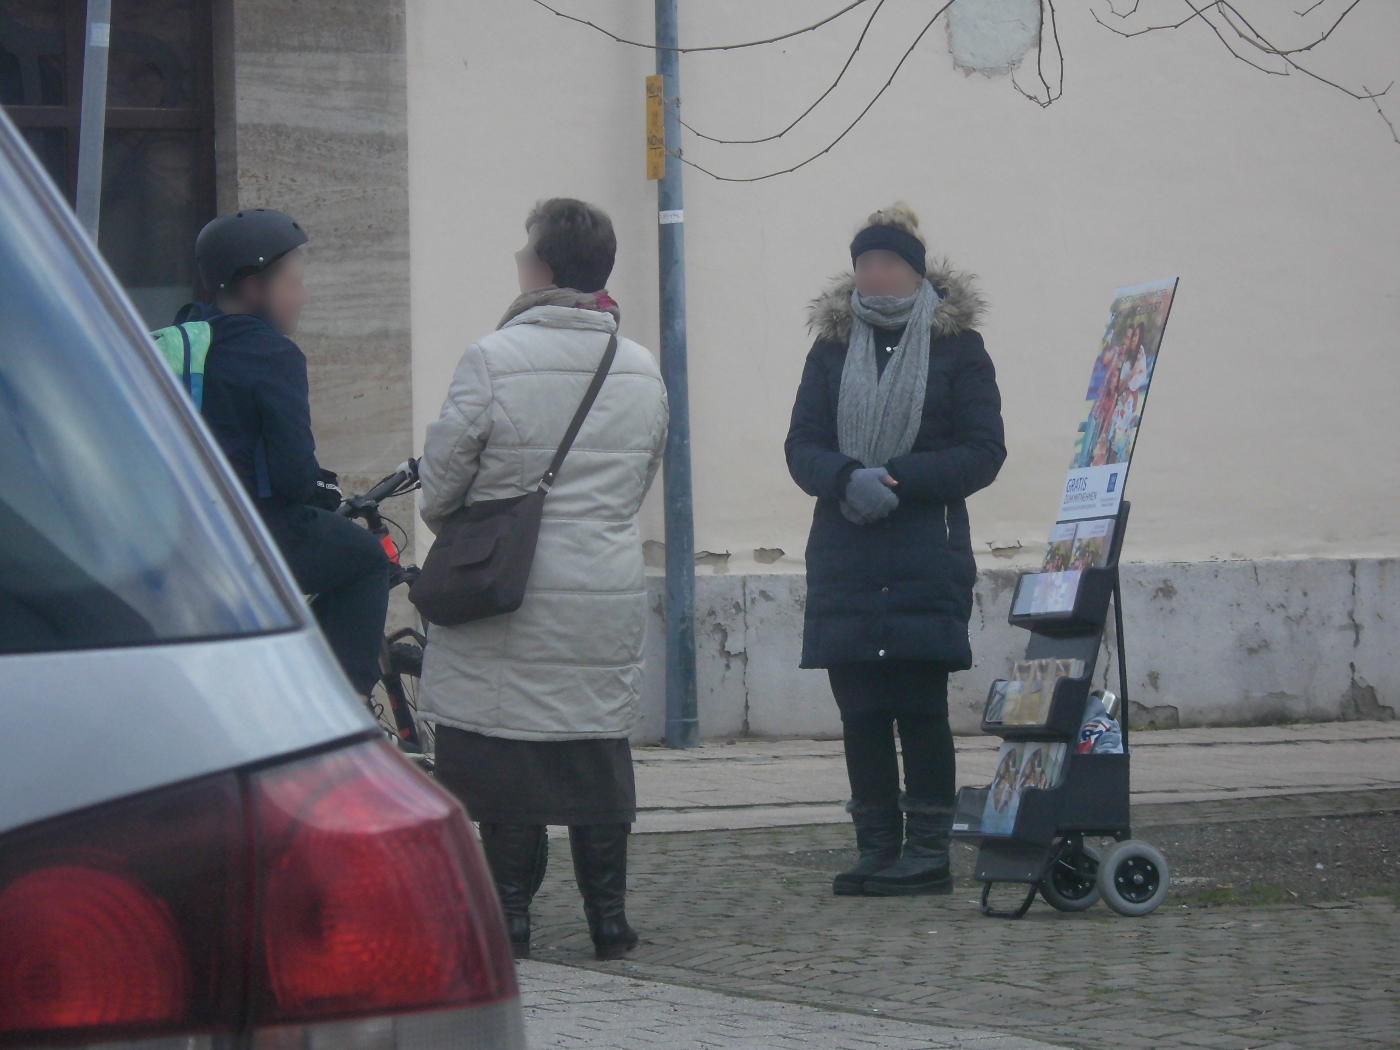 Jehovah's world domination begins in Speyer